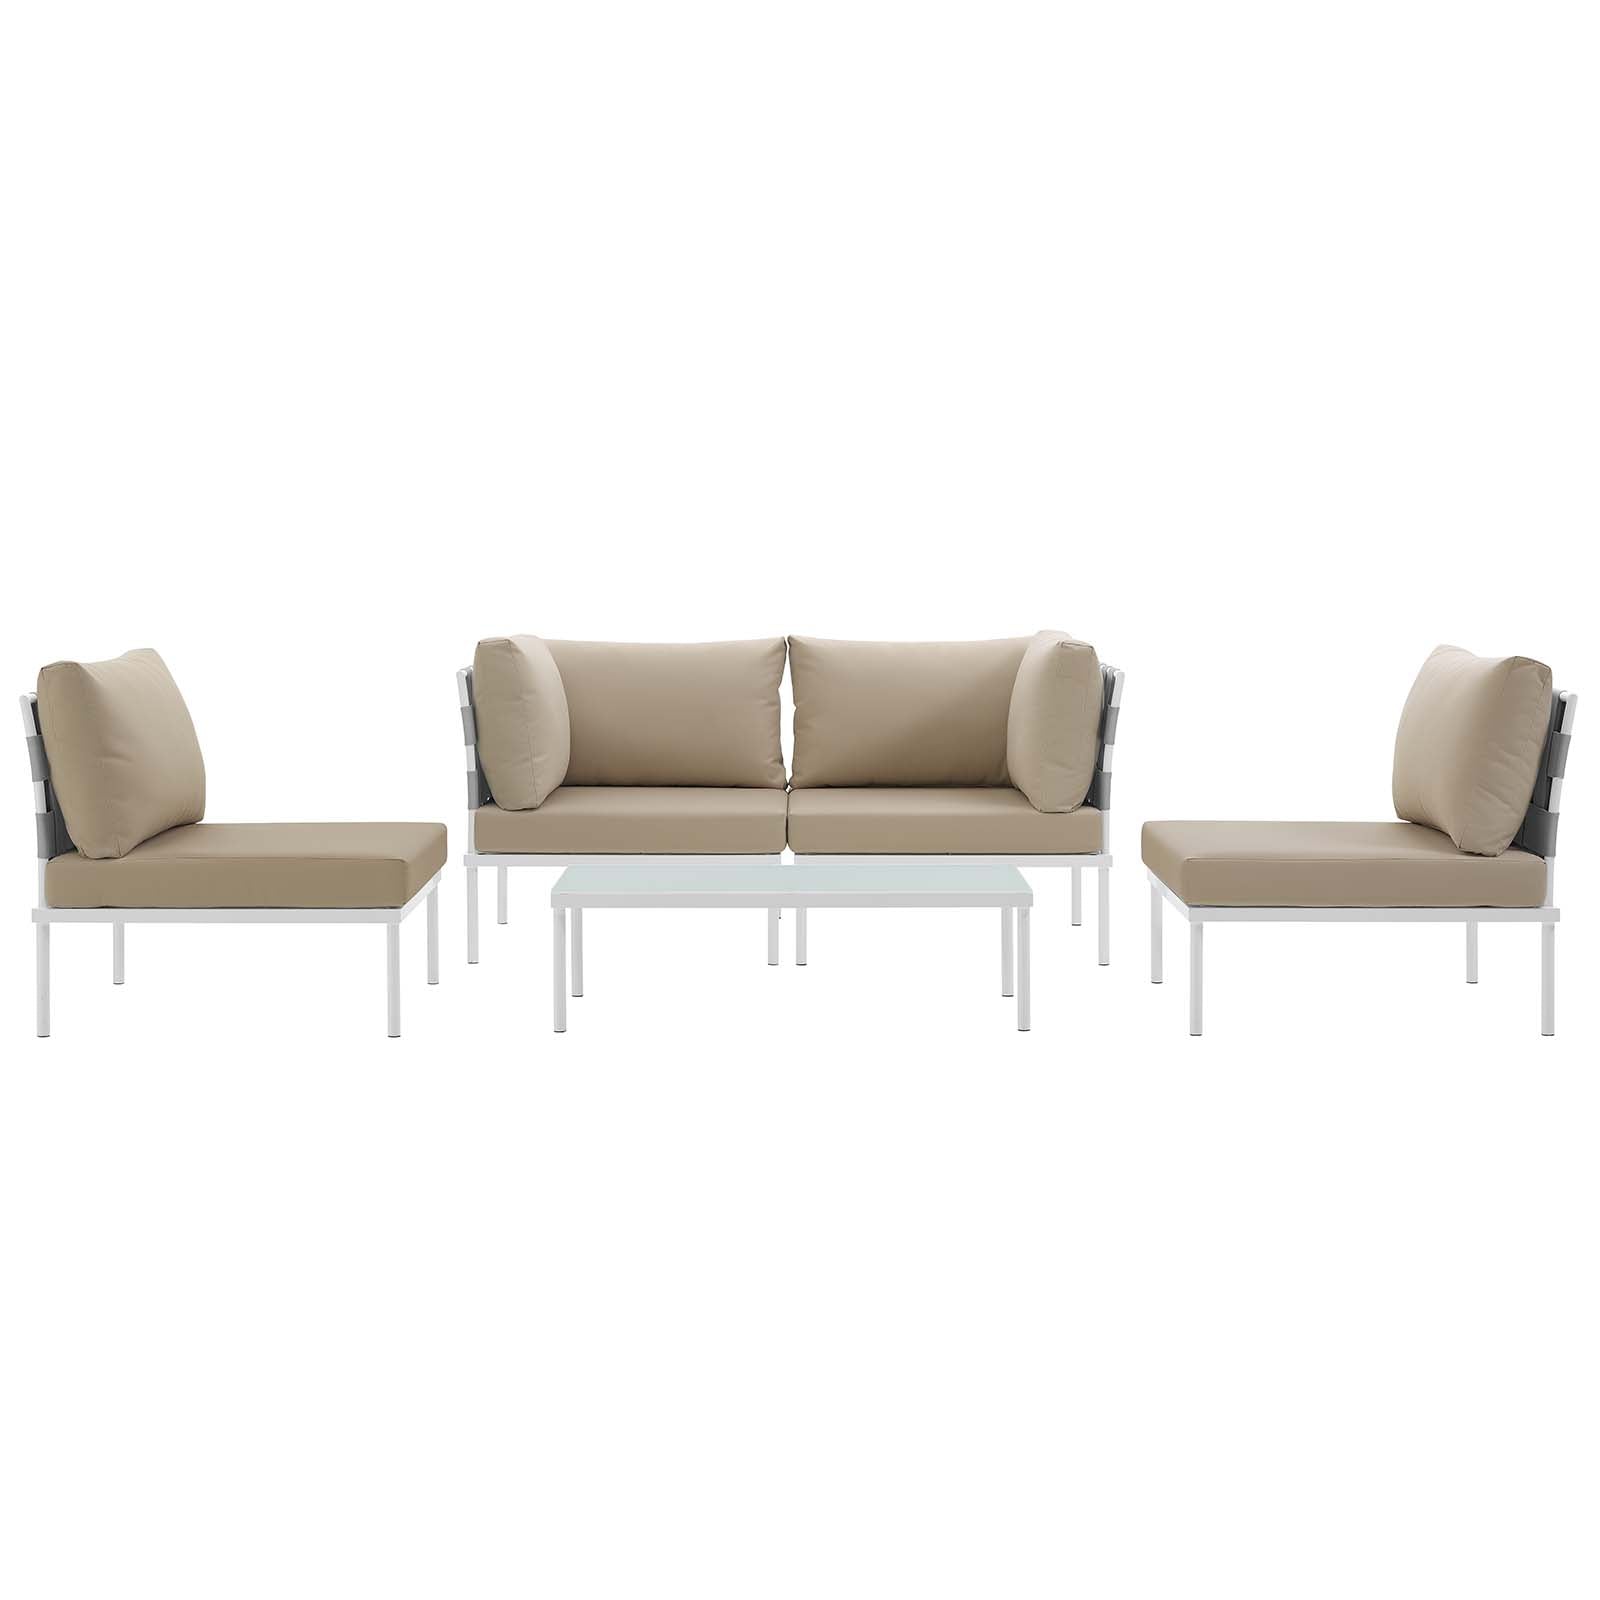 Modway Outdoor Conversation Sets - Harmony 5 Piece Outdoor 132"W Patio Aluminum Sectional Sofa Set Whit